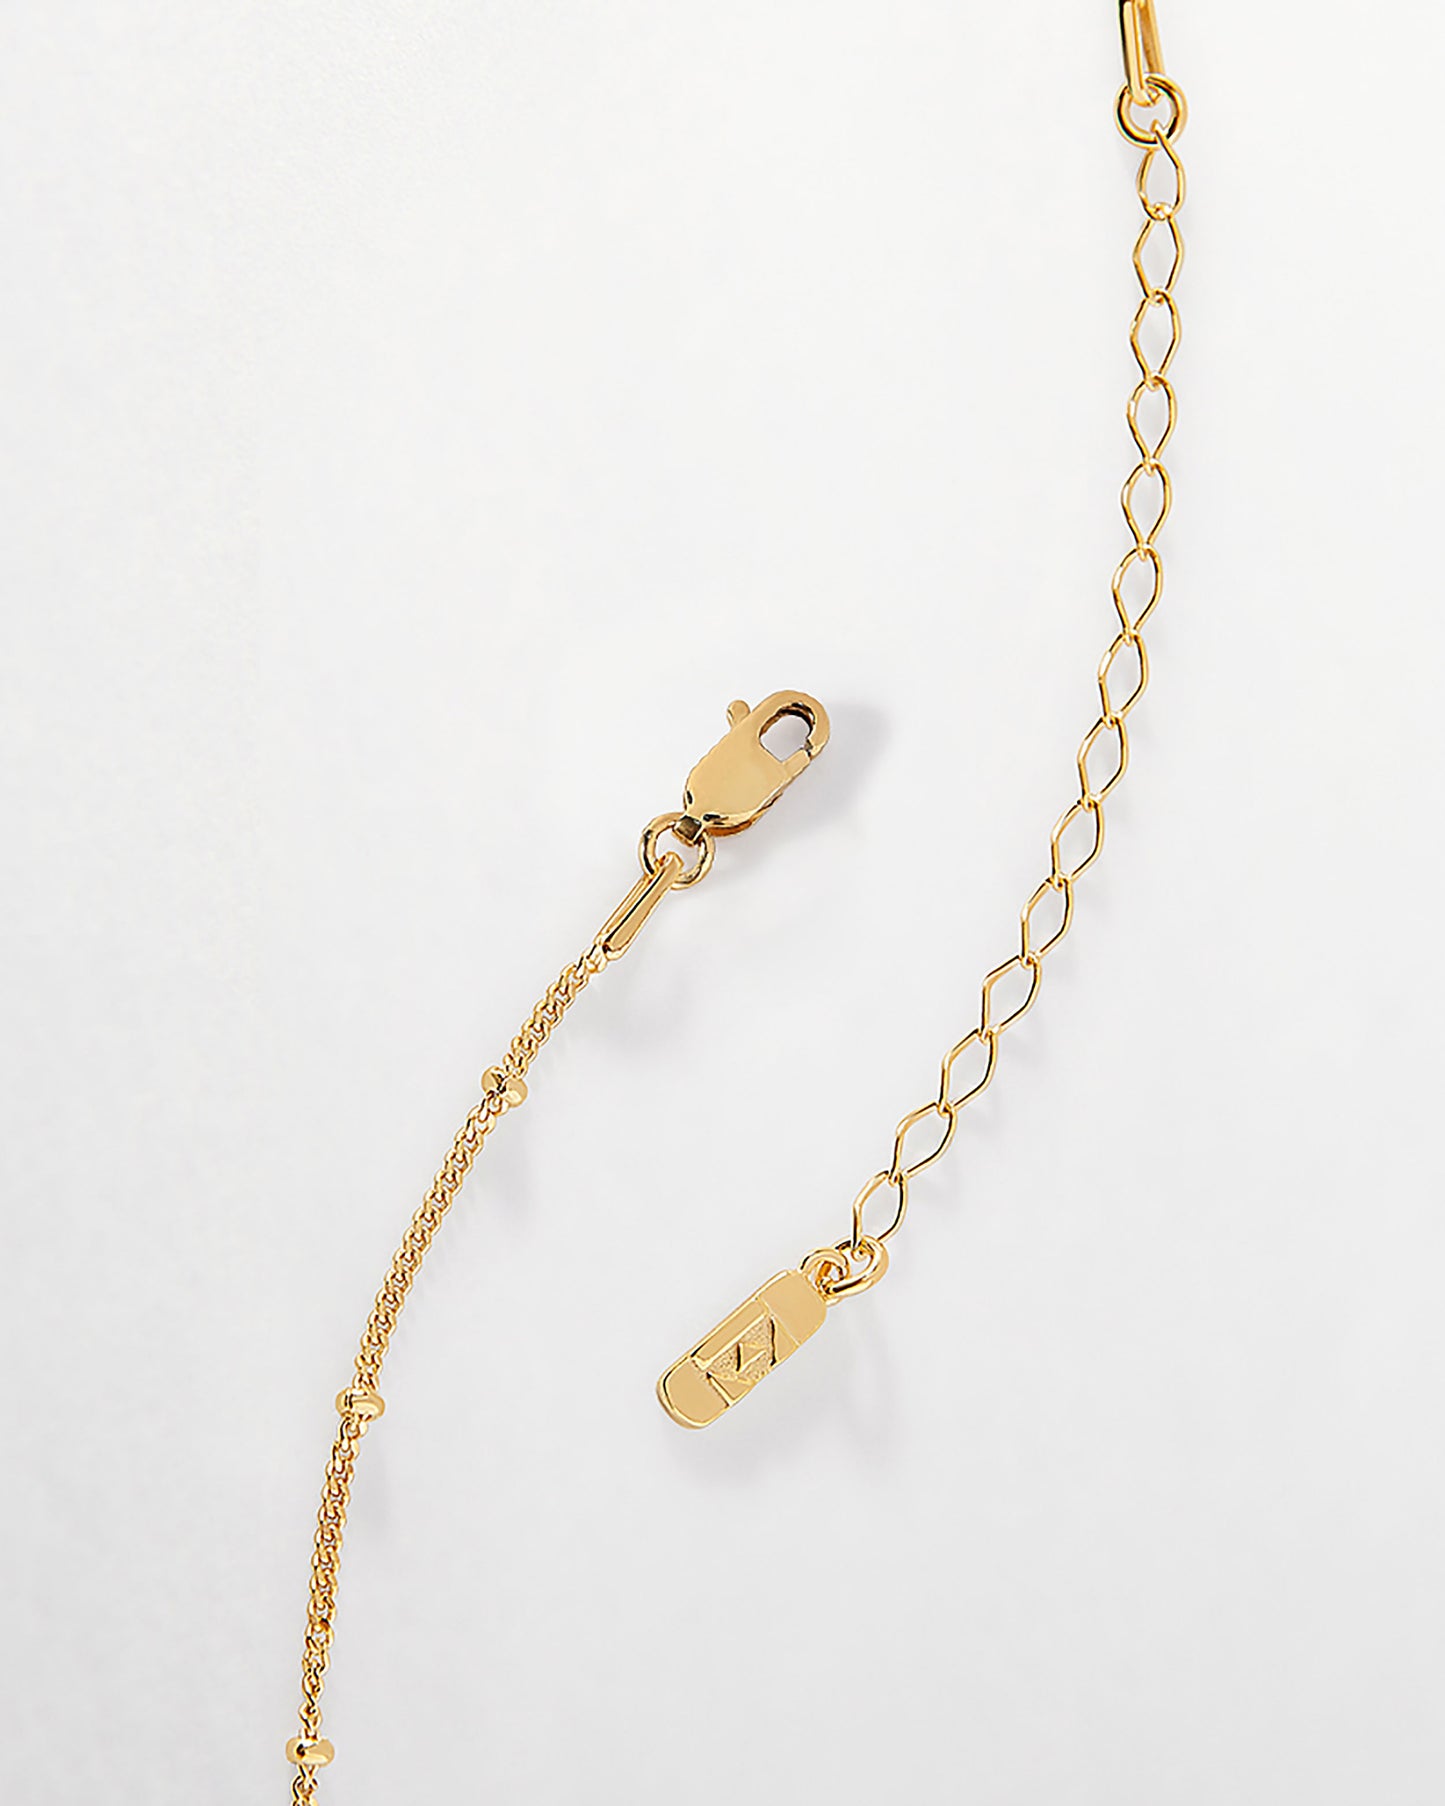 Double Initial Necklace - Gold